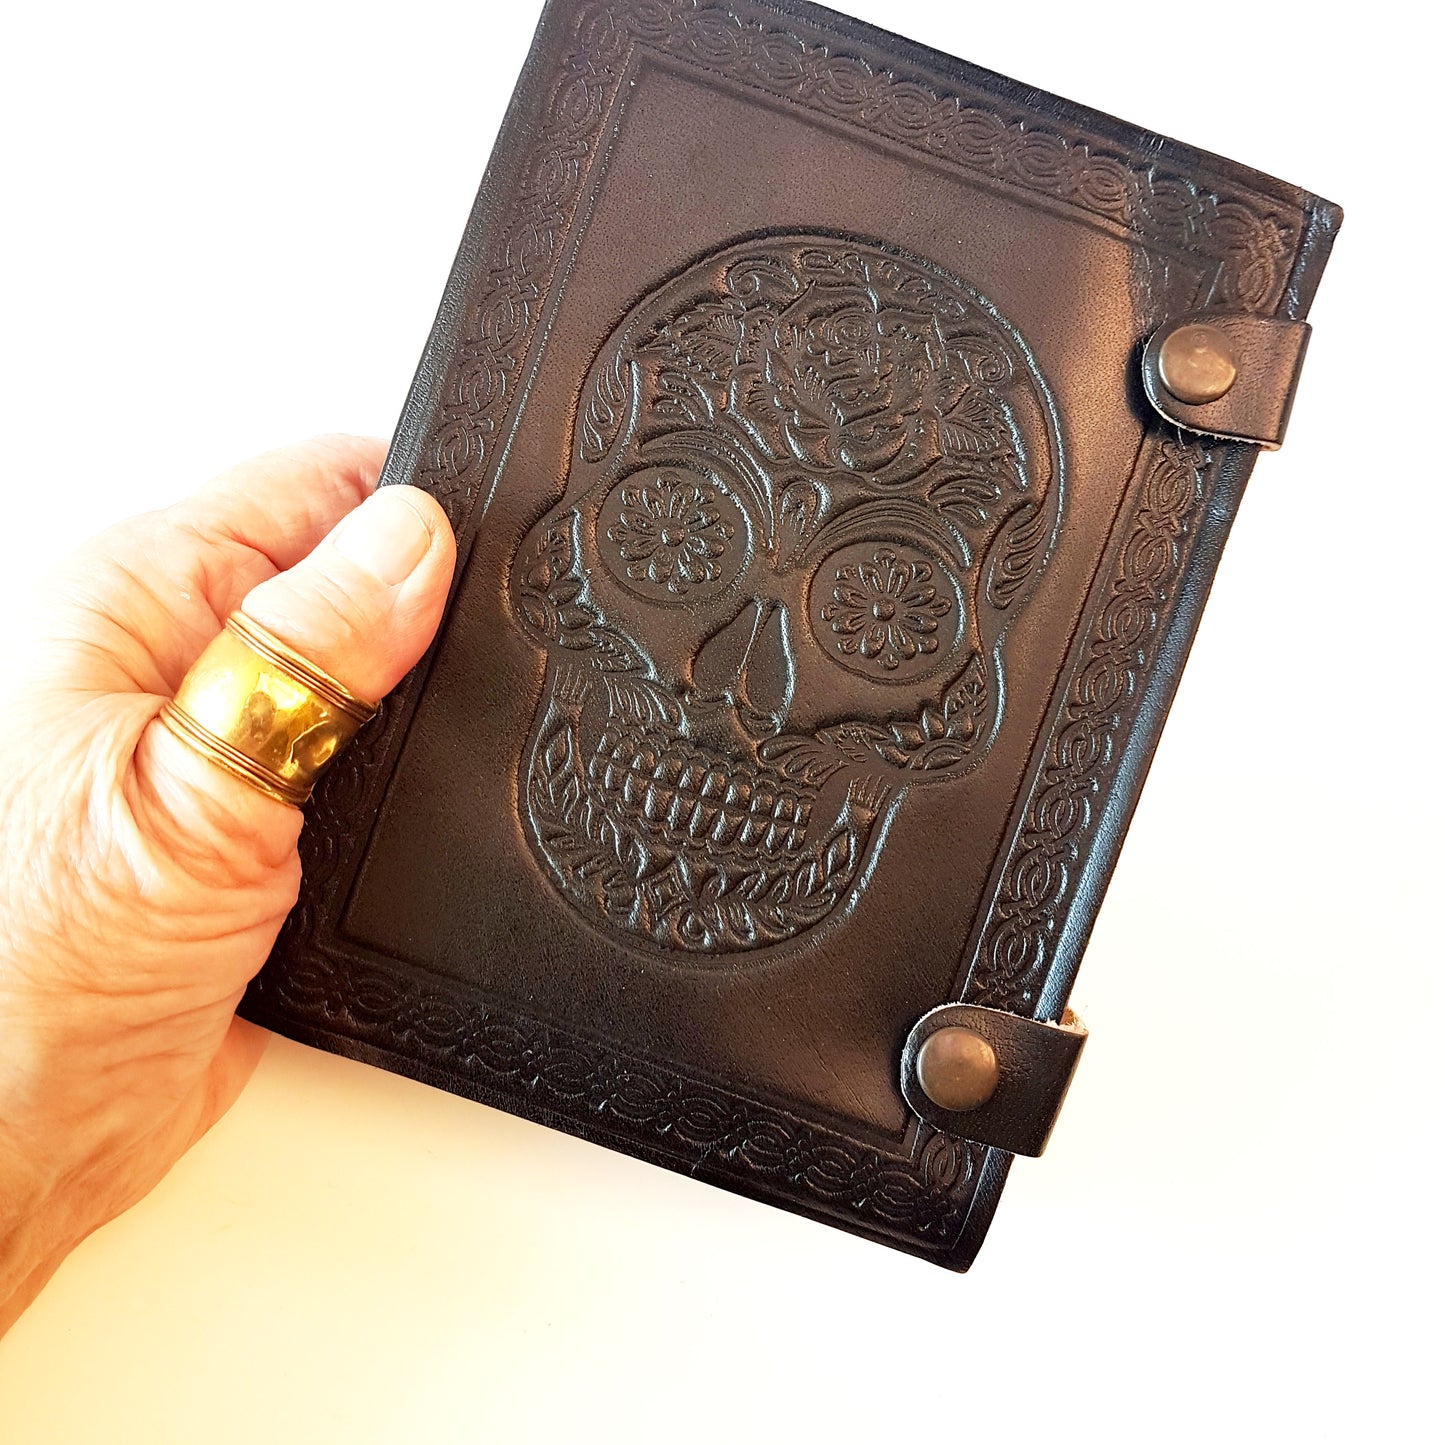 Genuine black leather bound sugarskull design journal. Black 5x7 inch skull grimoire with blank premium quality paper pages.